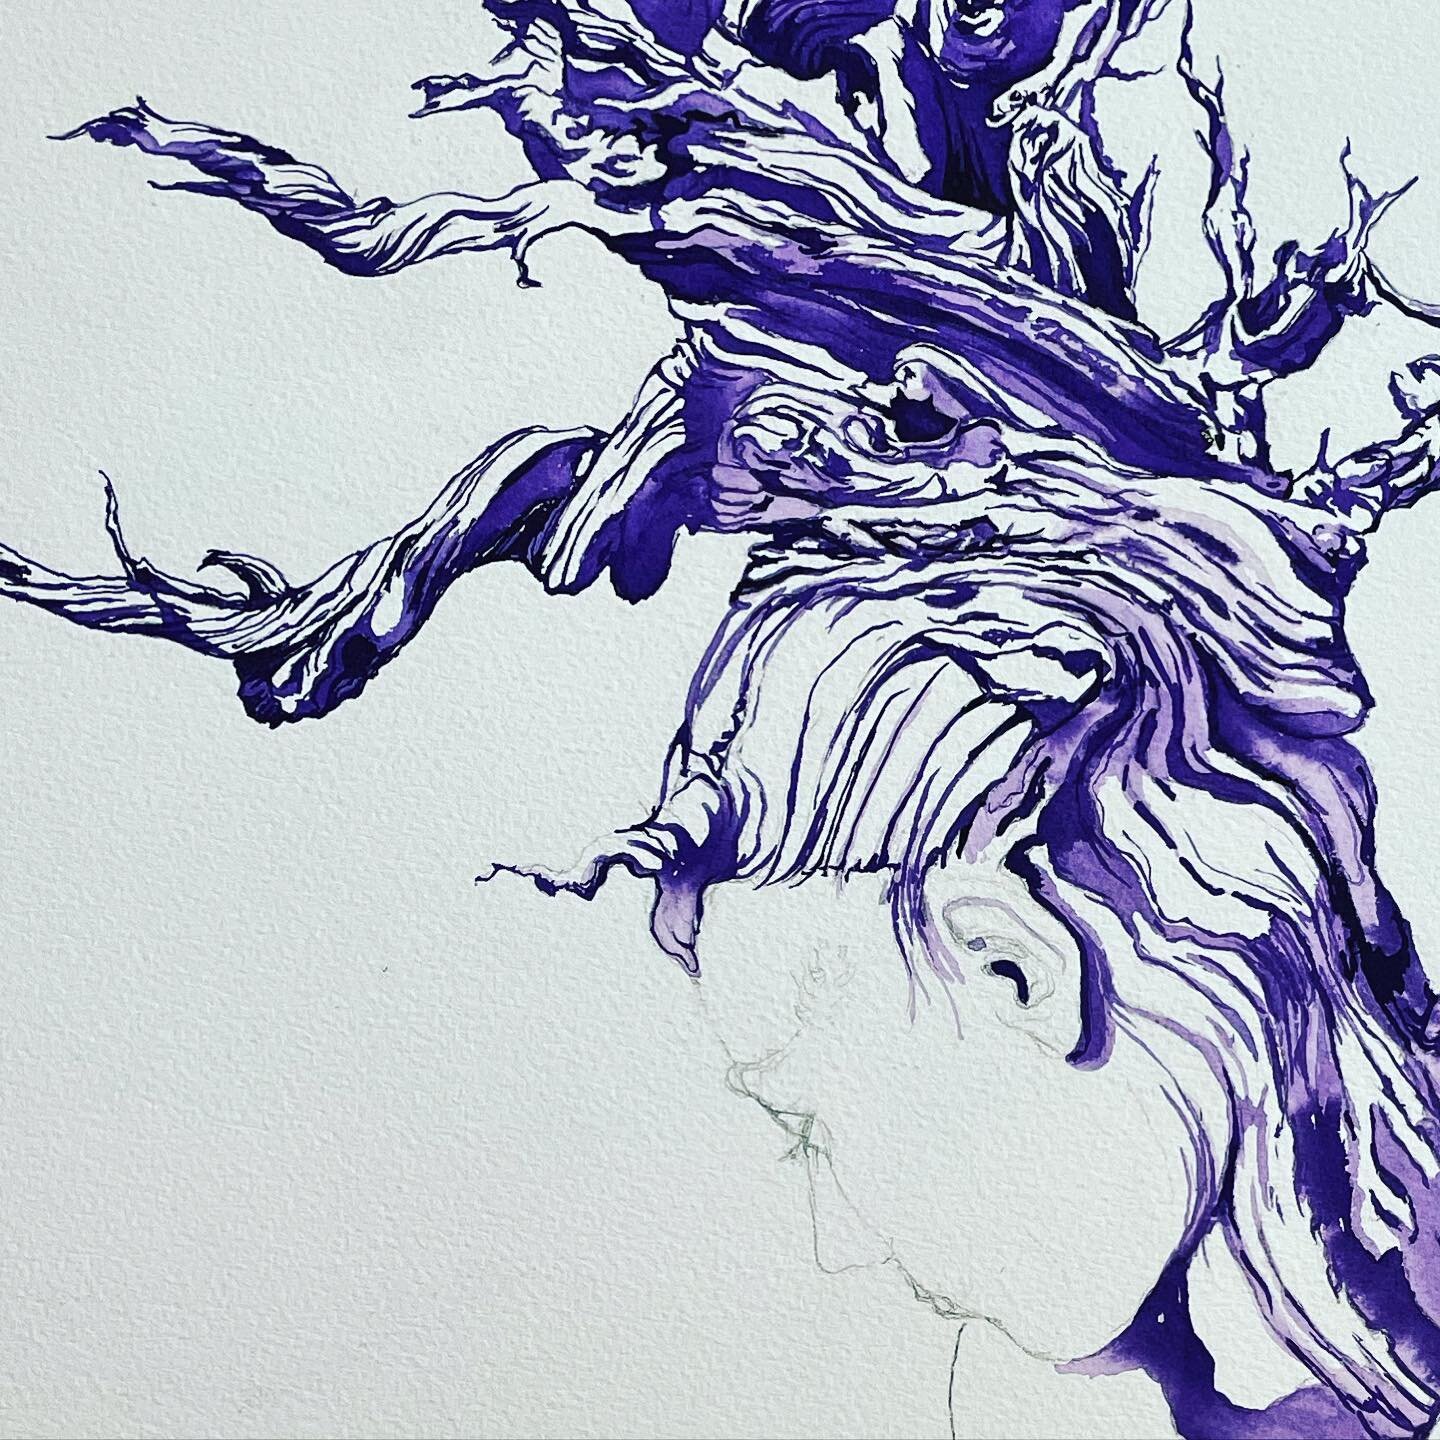 Working on a thing today. I haven&rsquo;t been taking enough time for art lately. #dryad #lindaknollart